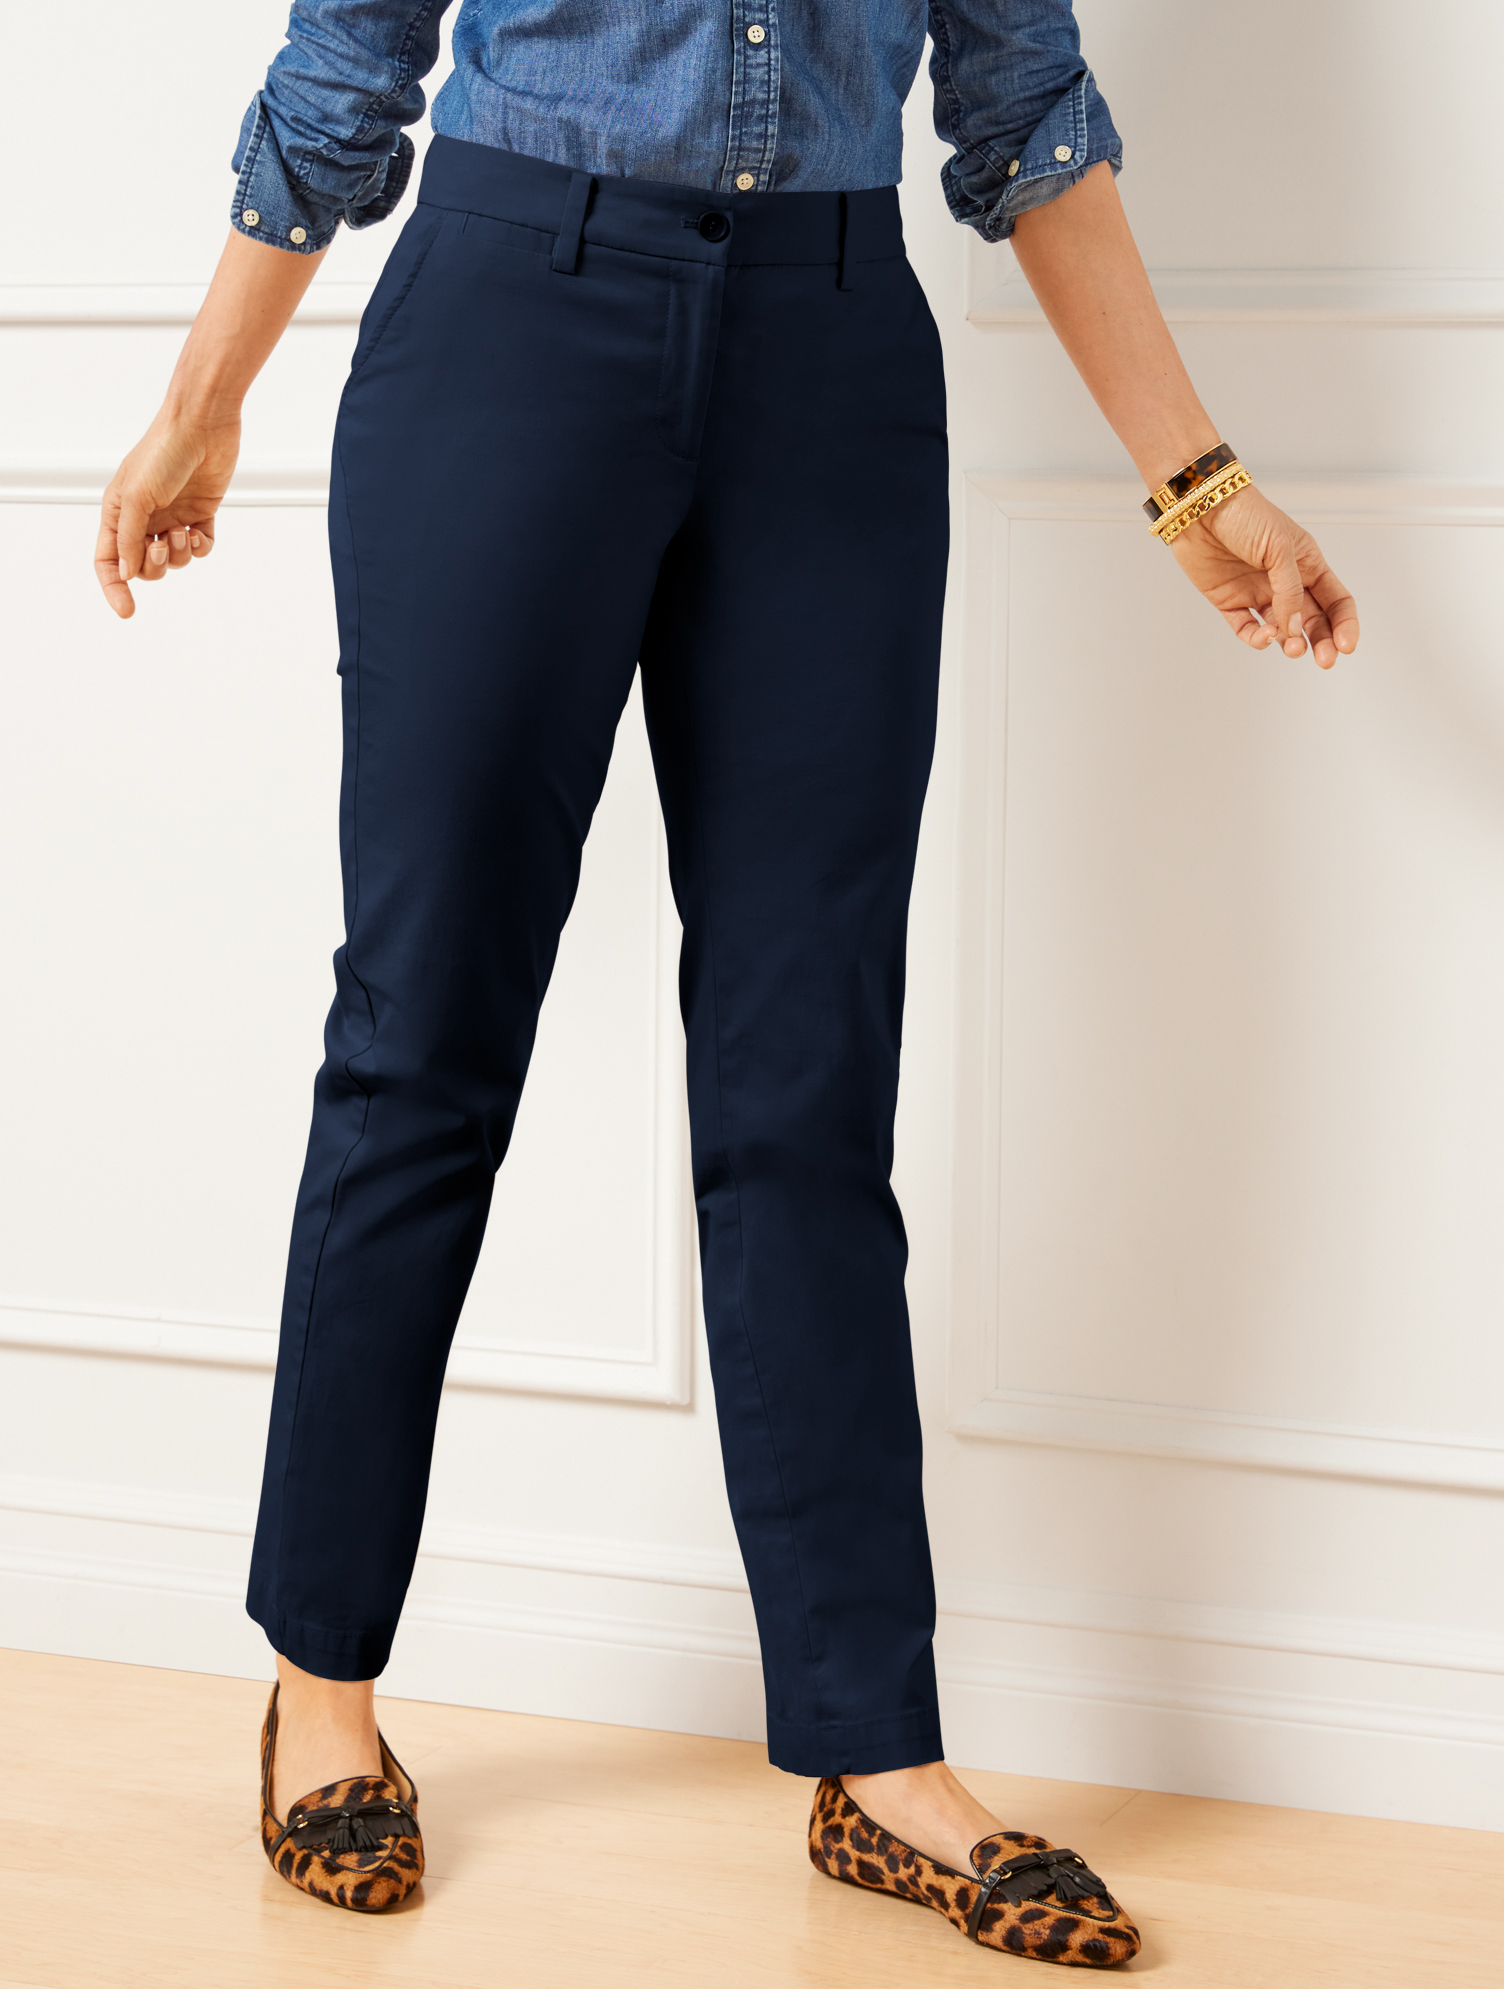 Talbots Perfect Chinos Pants - Curvy Fit - Blue - 22